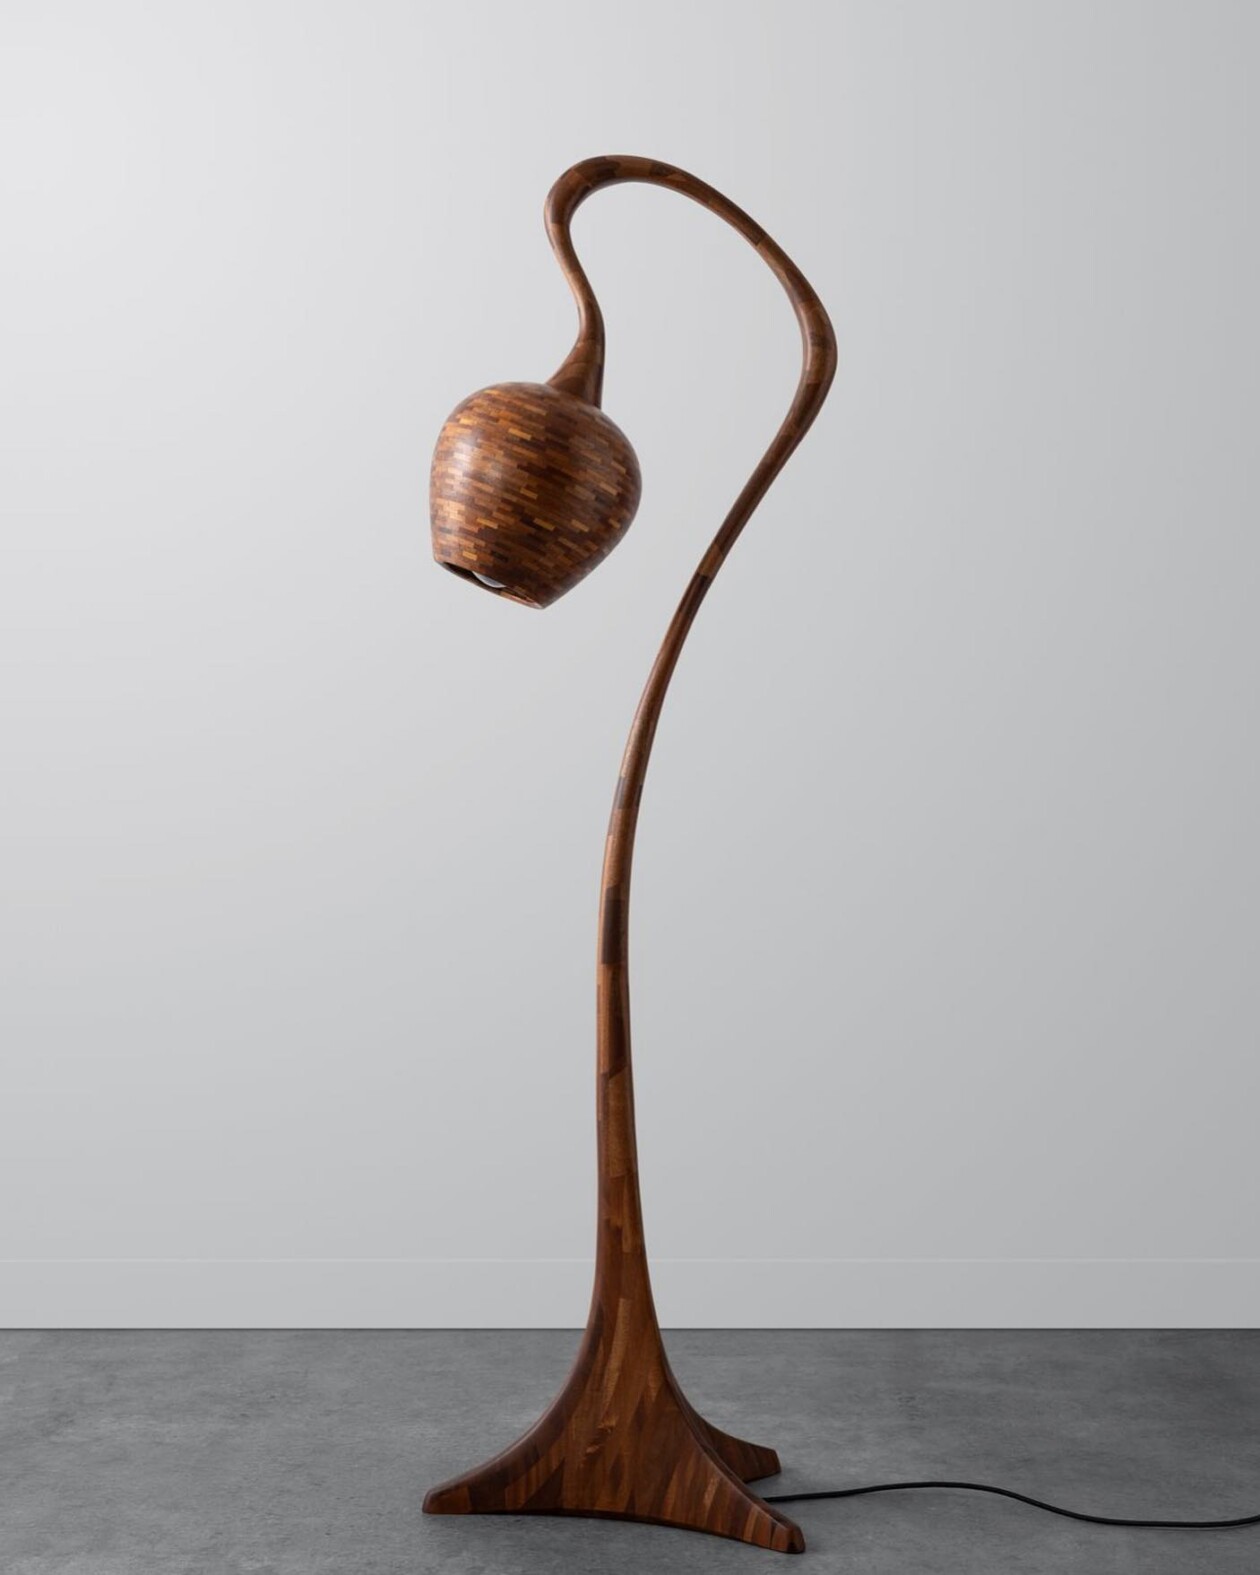 Elegant Sculptural Objects And Furniture By Richard Haining (16)